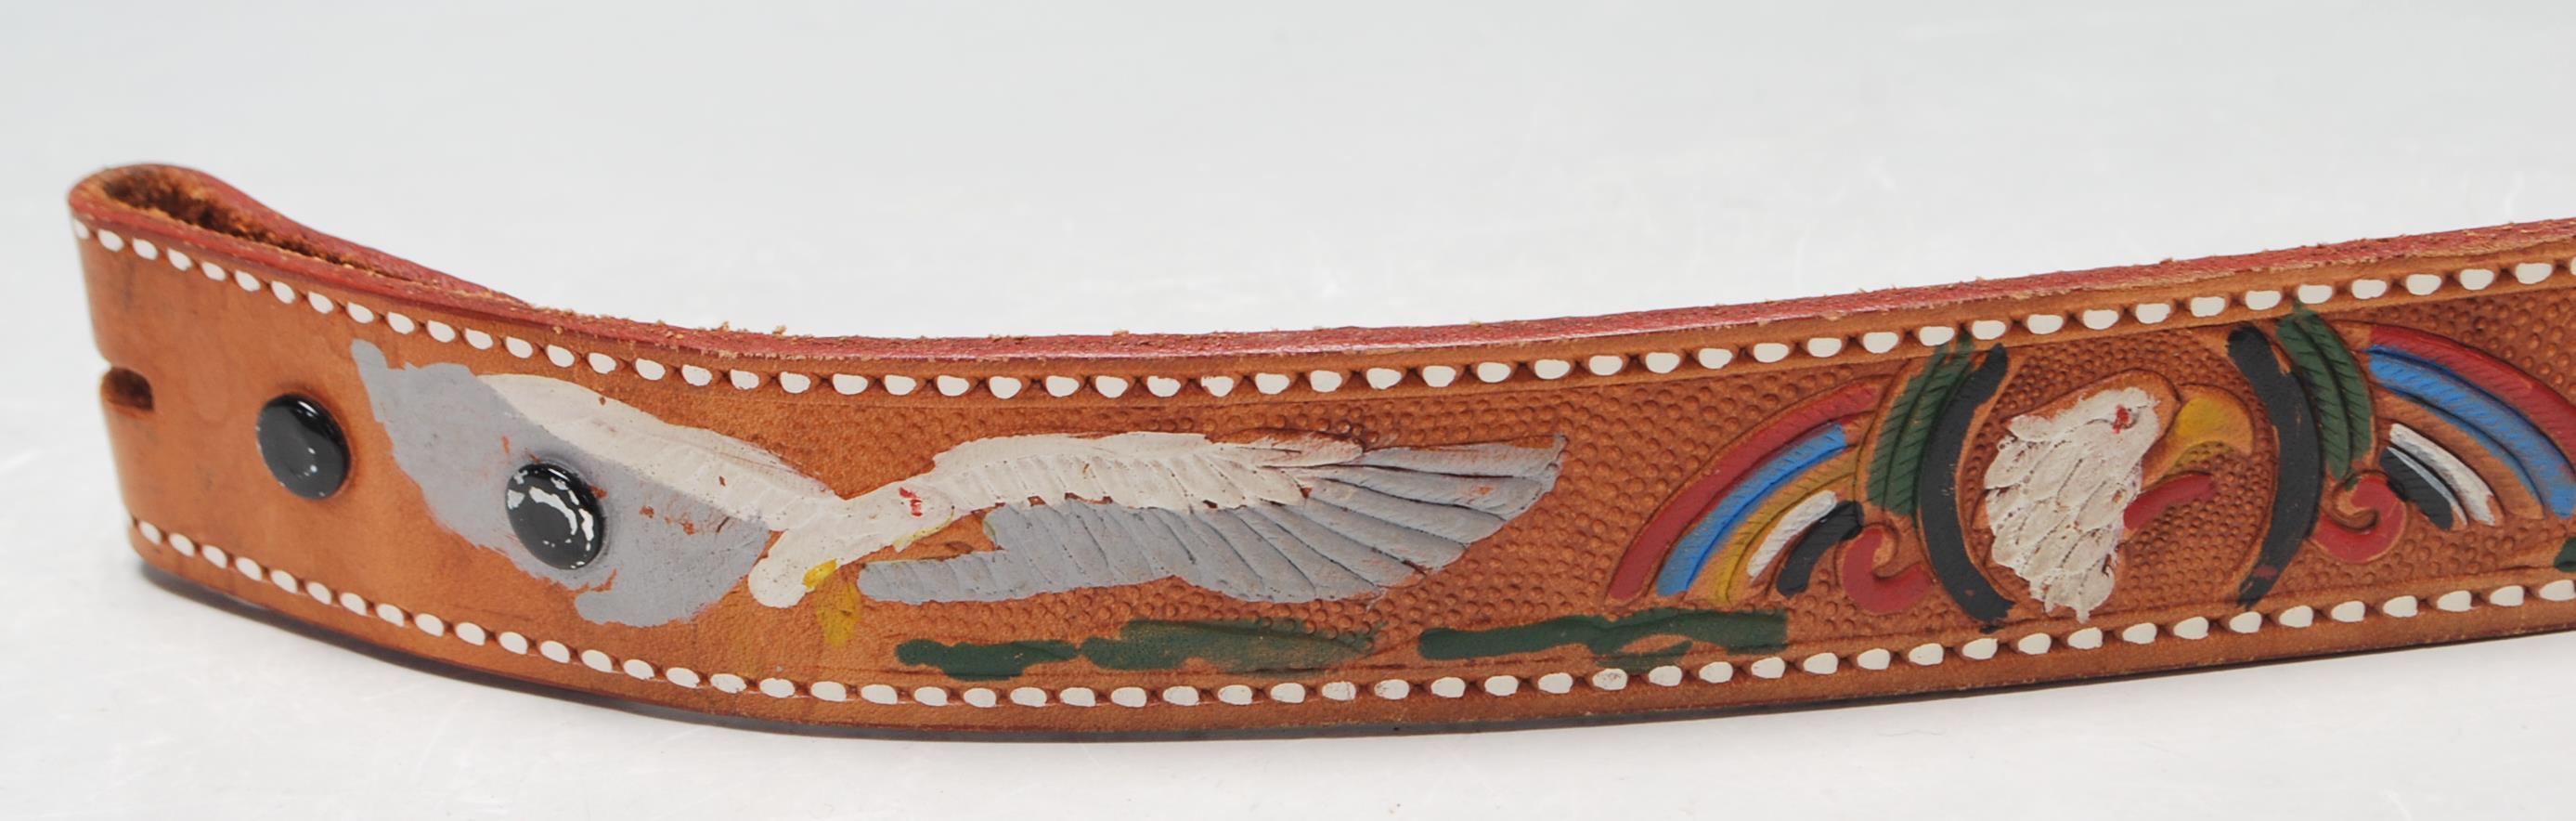 VINTAGE AMERICAN TAN BROWN LEATHER BELT AND METAL BUCK WITH AMERICAN INDIAN DECORATION - Image 6 of 8